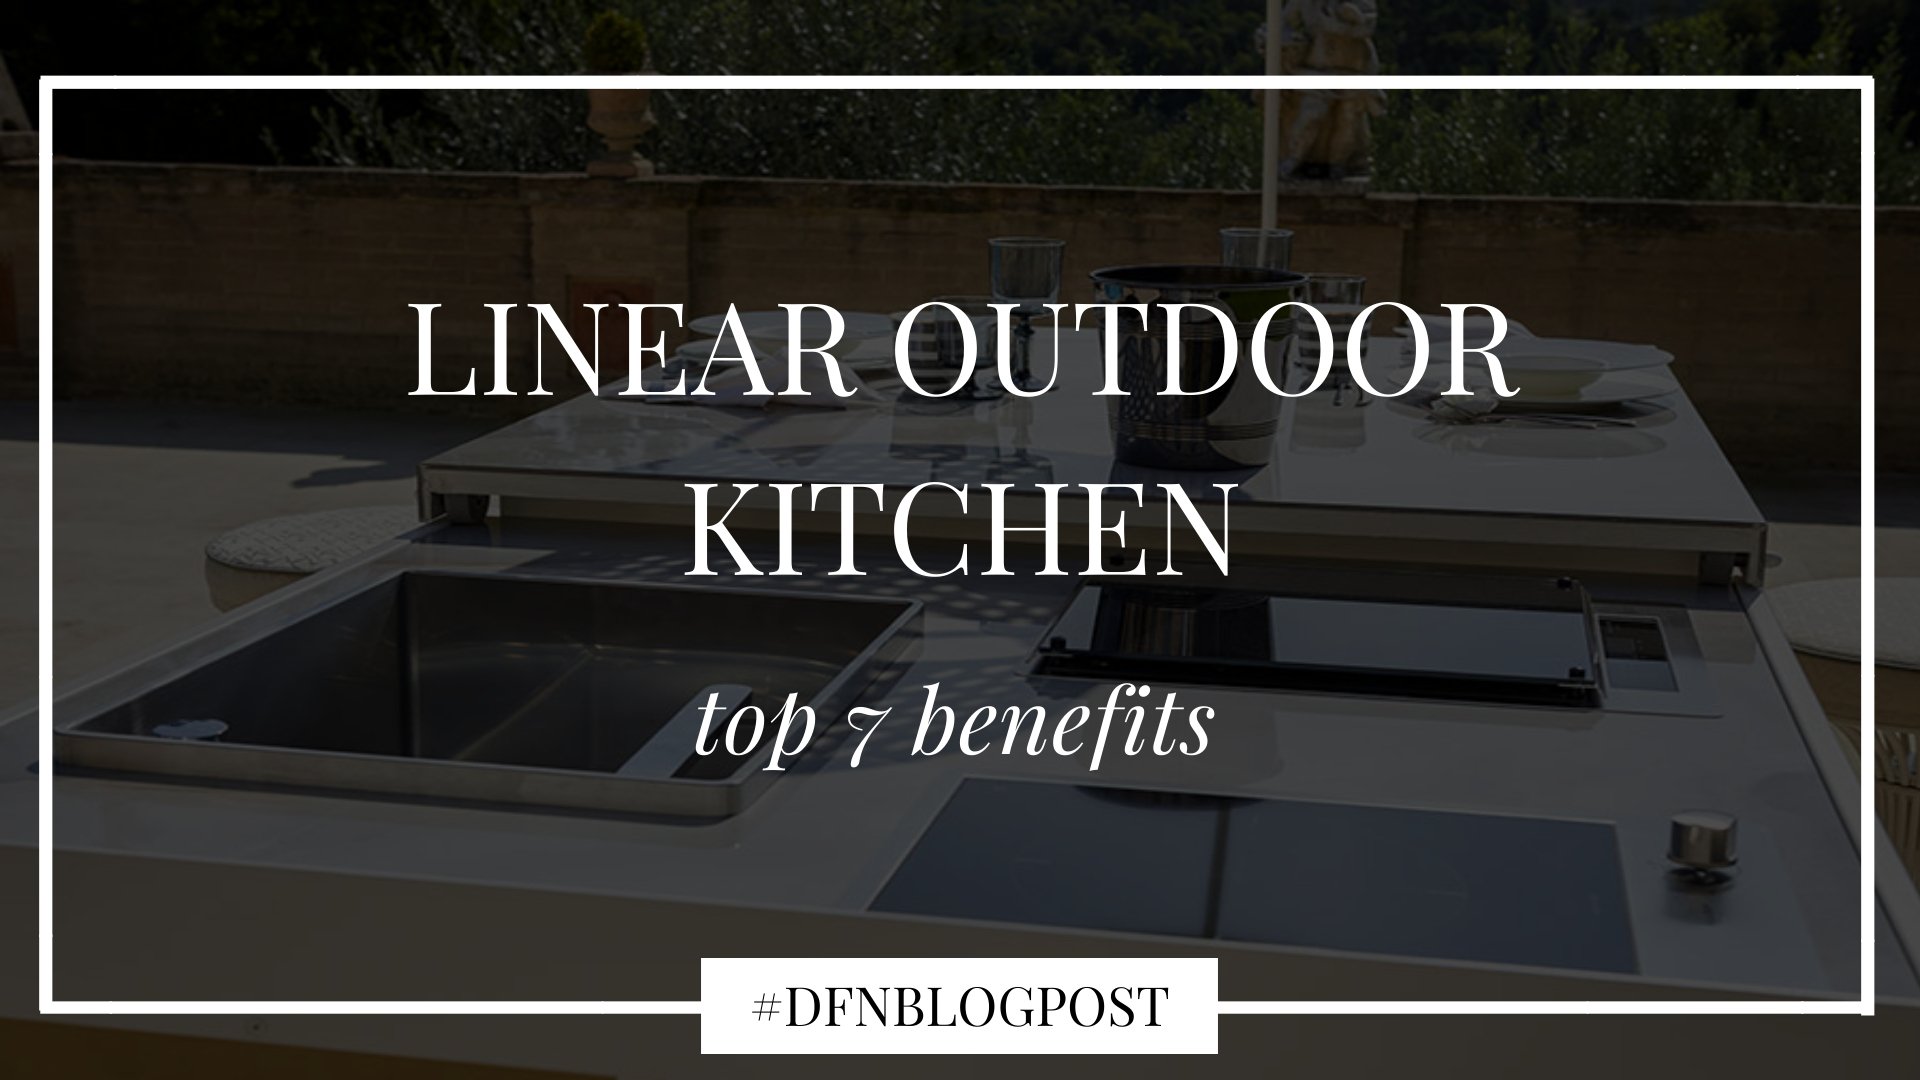 Top 7 benefits of a linear outdoor kitchen